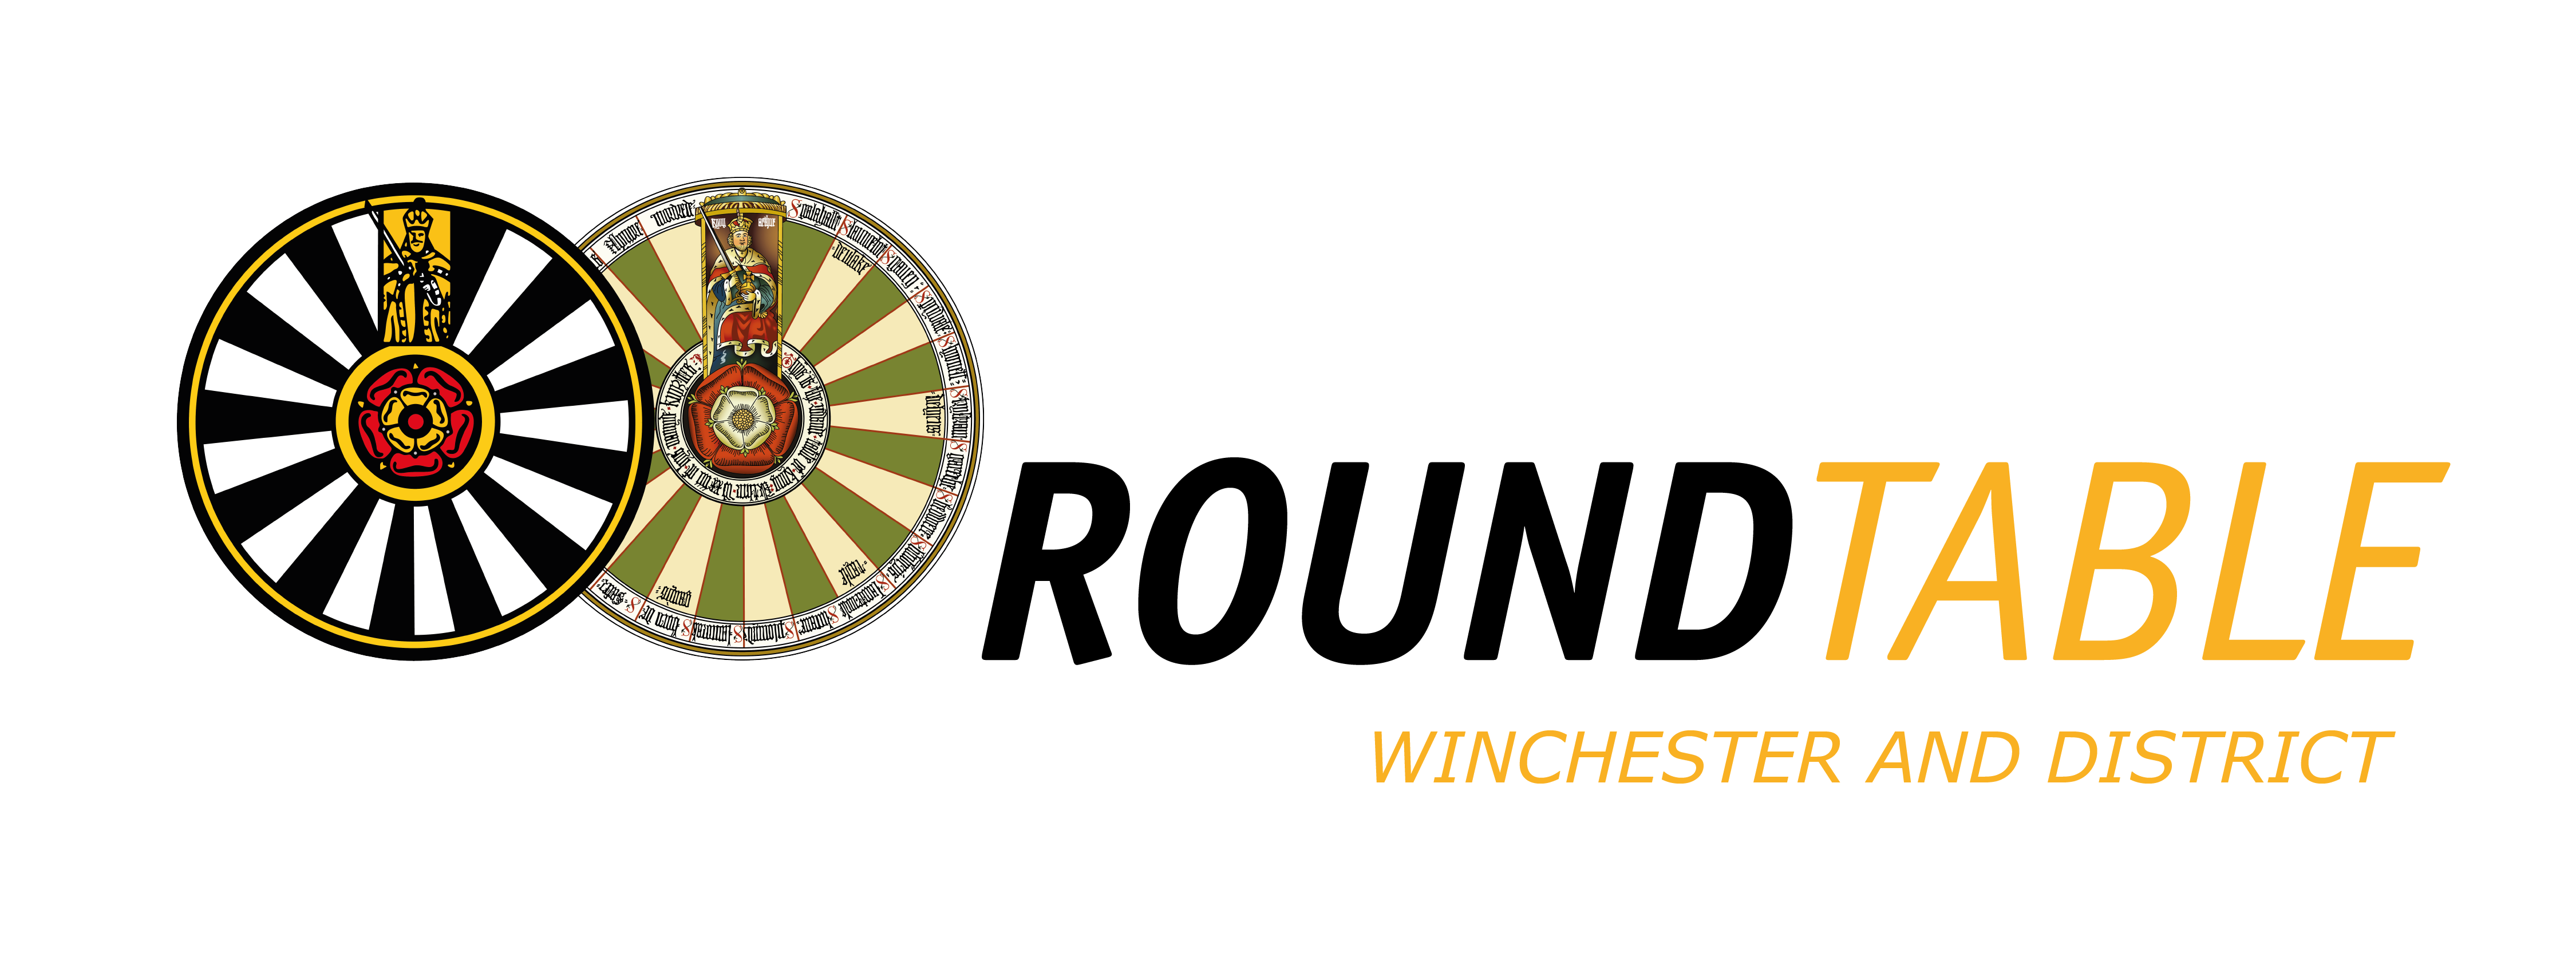 Logo of Winchester Round Table - image of the double rondel of Round Table GB&I and the Winchester round table seen in the great hall. Text graphic headline Round Table Winchester & District